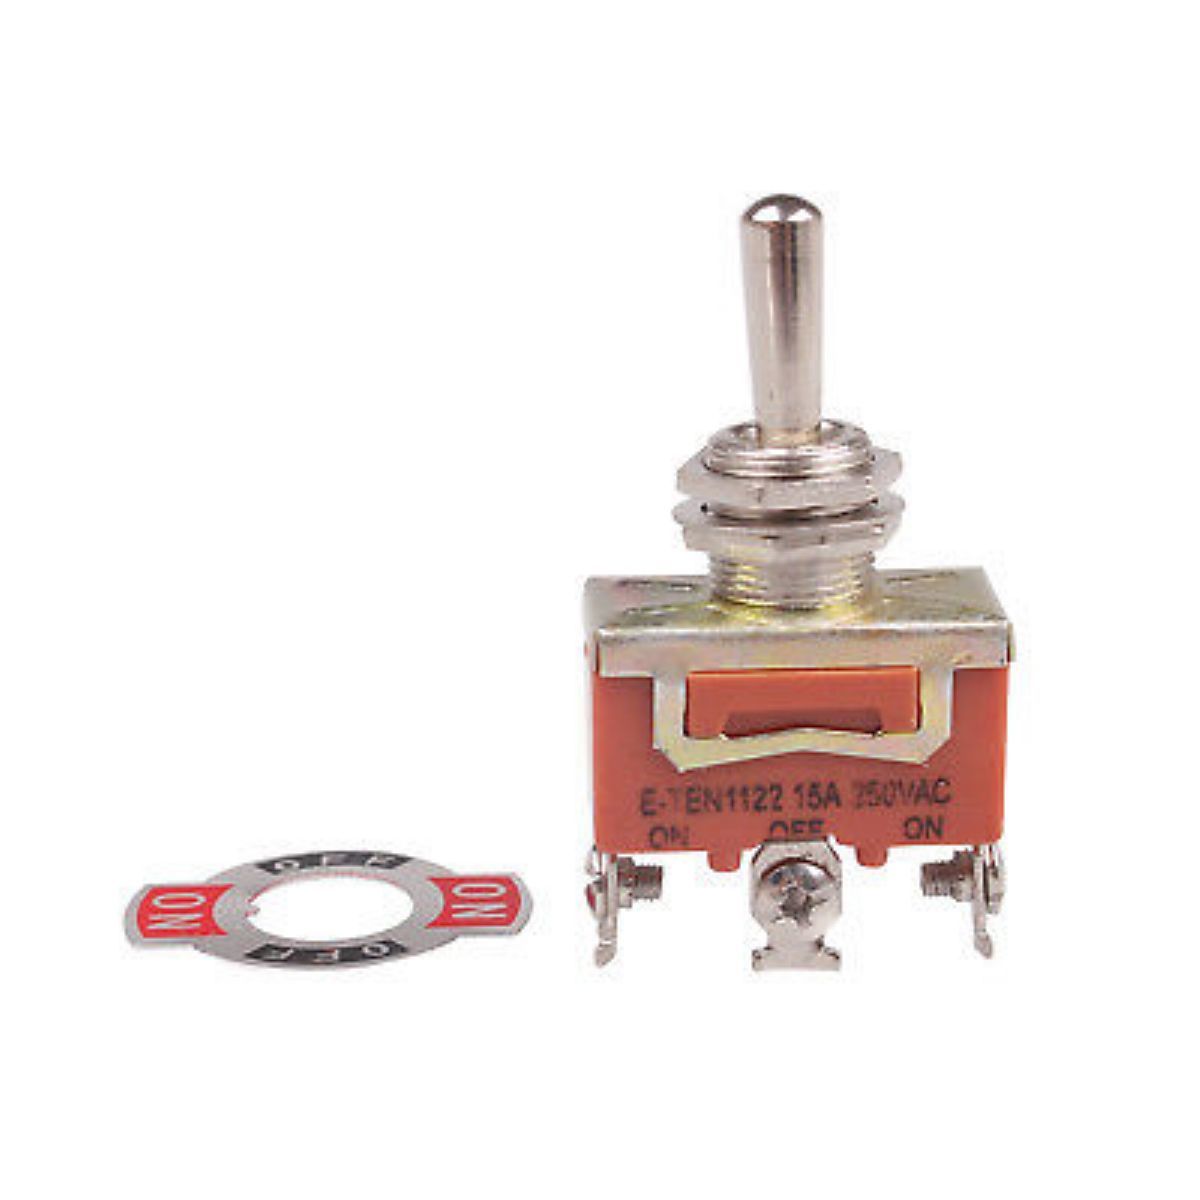 E-TEN1122 Toggle Switch On - off - on